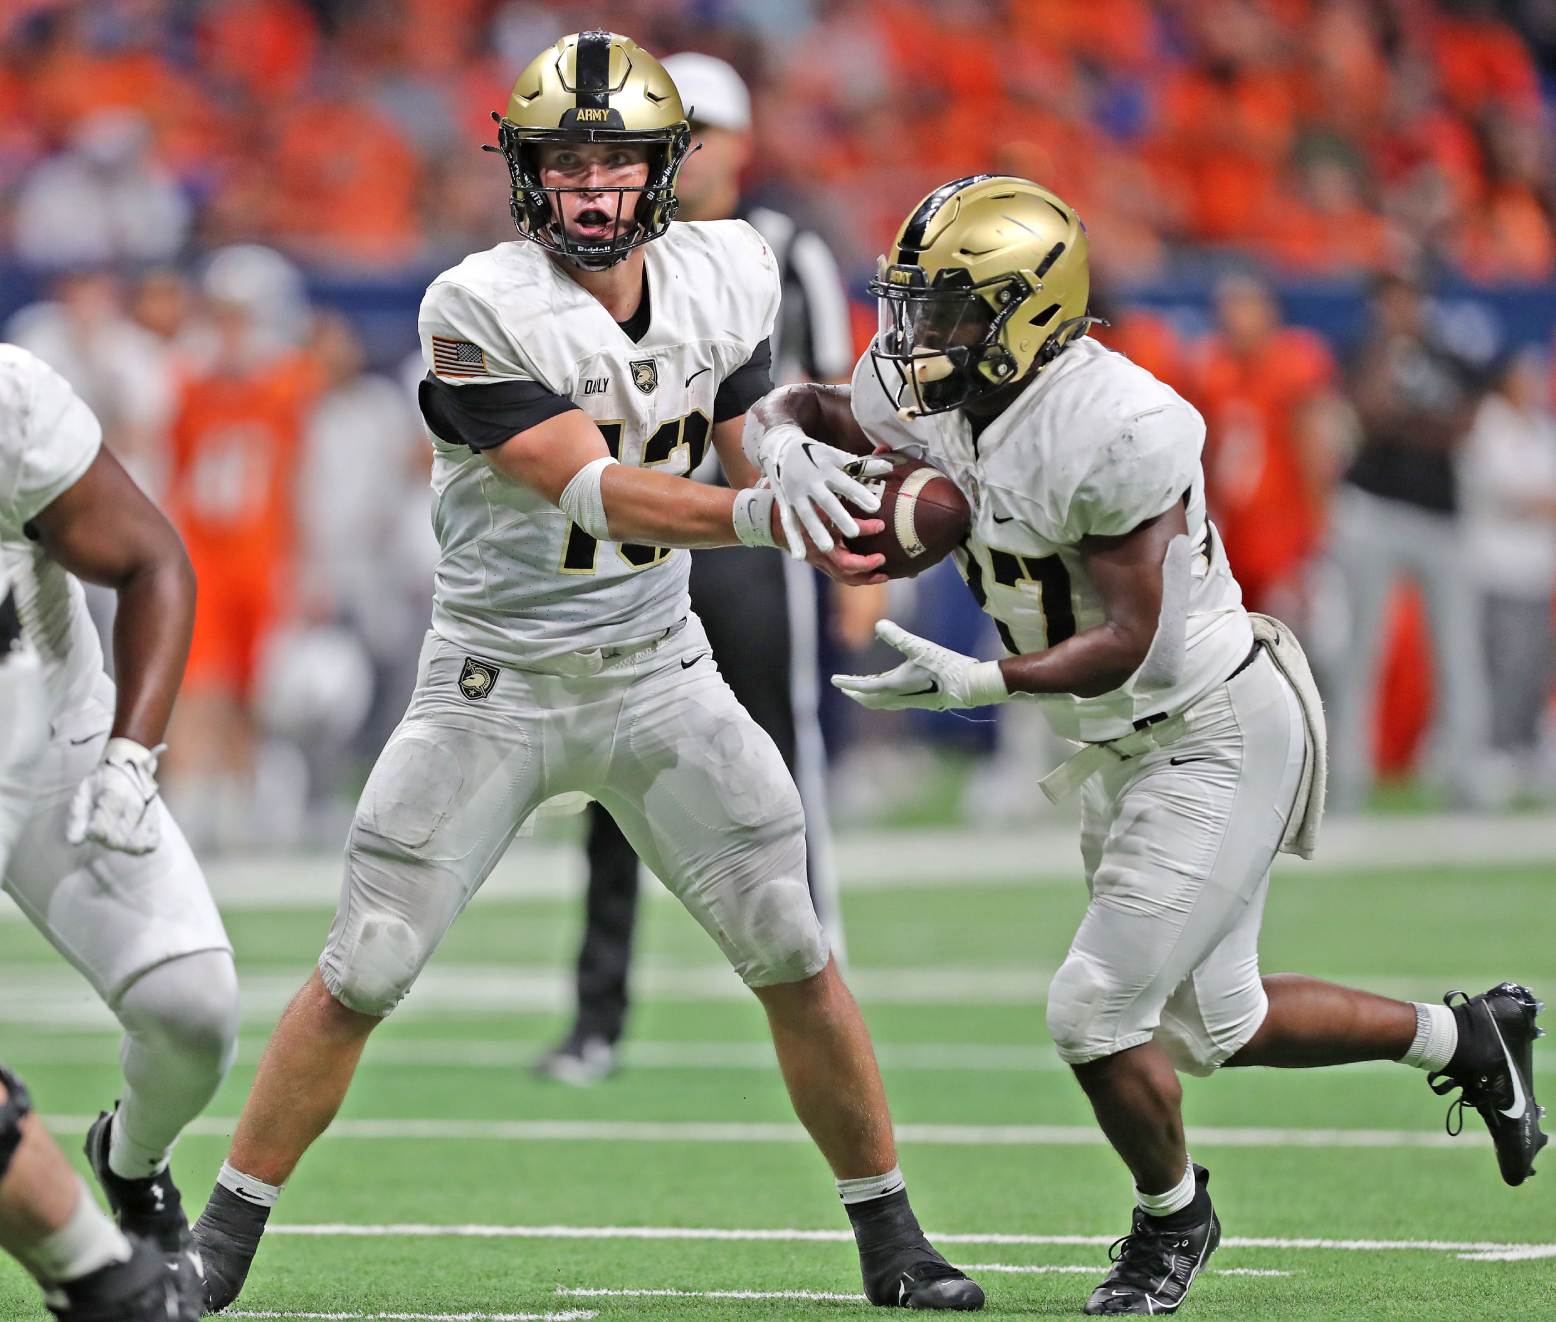 Sep 15, 2023; San Antonio, Texas, USA; Army Black Knights quarterback Bryson Daily (13) hands off the ball to running back Markel Johnson (27) during the second half against the UTSA Roadrunners at the Alamodome. Credit: Danny Wild-USA TODAY Sports